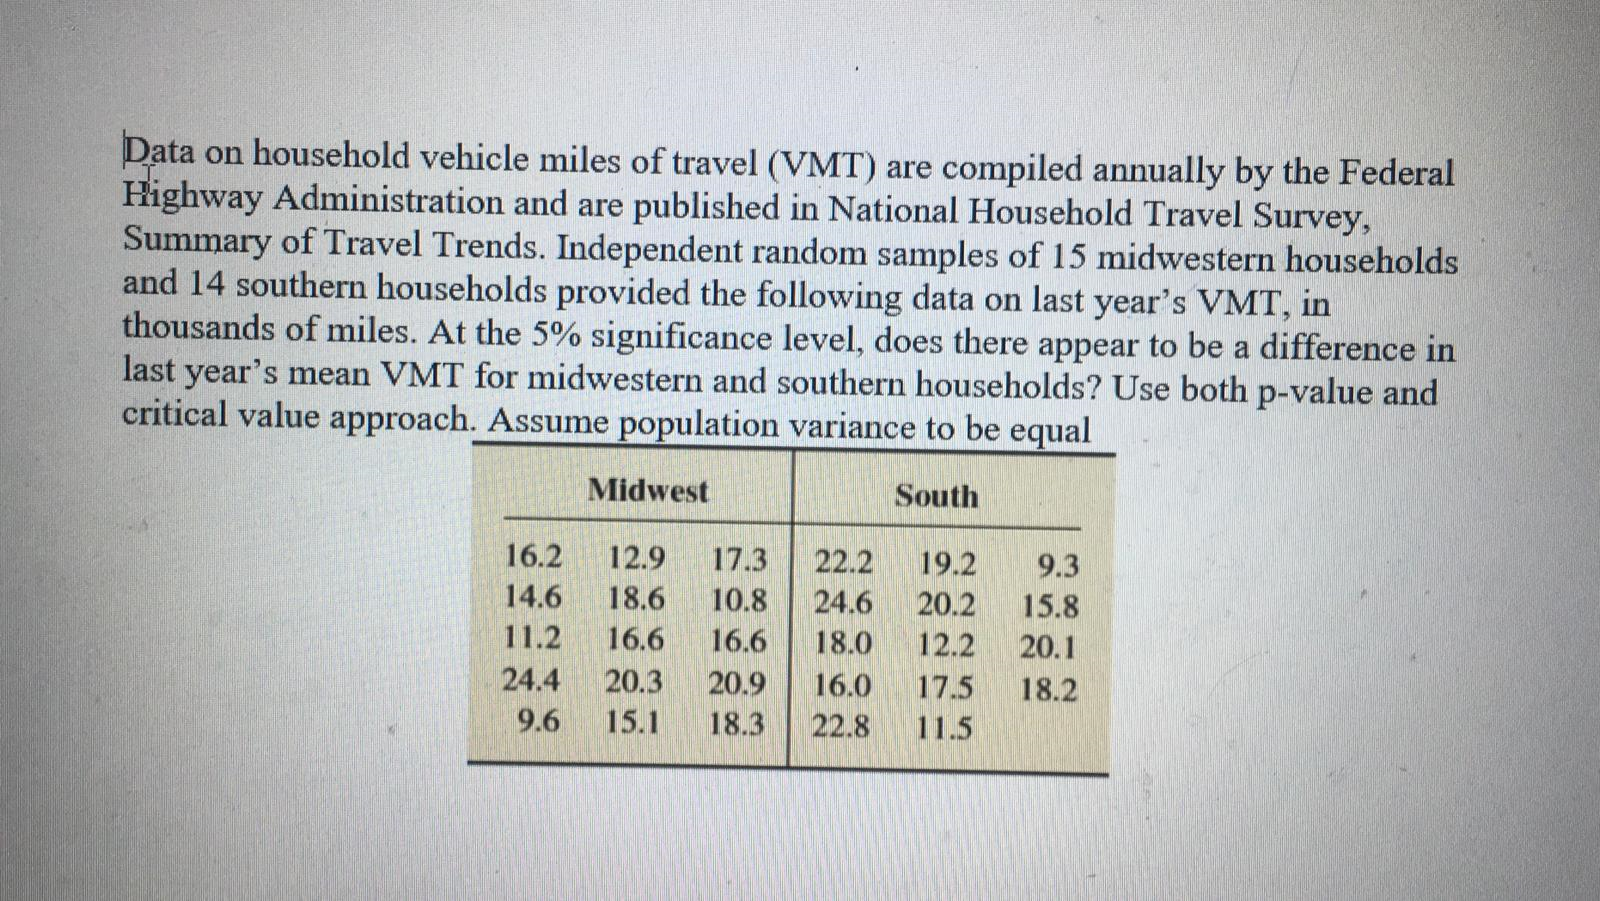 Data on household vehicle miles of travel (VMT) are compiled annually by the Federal
Highway Administration and are published in National Household Travel Survey,
Summary of Travel Trends. Independent random samples of 15 midwestern households
and 14 southern households provided the following data on last year's VMT, in
thoug
